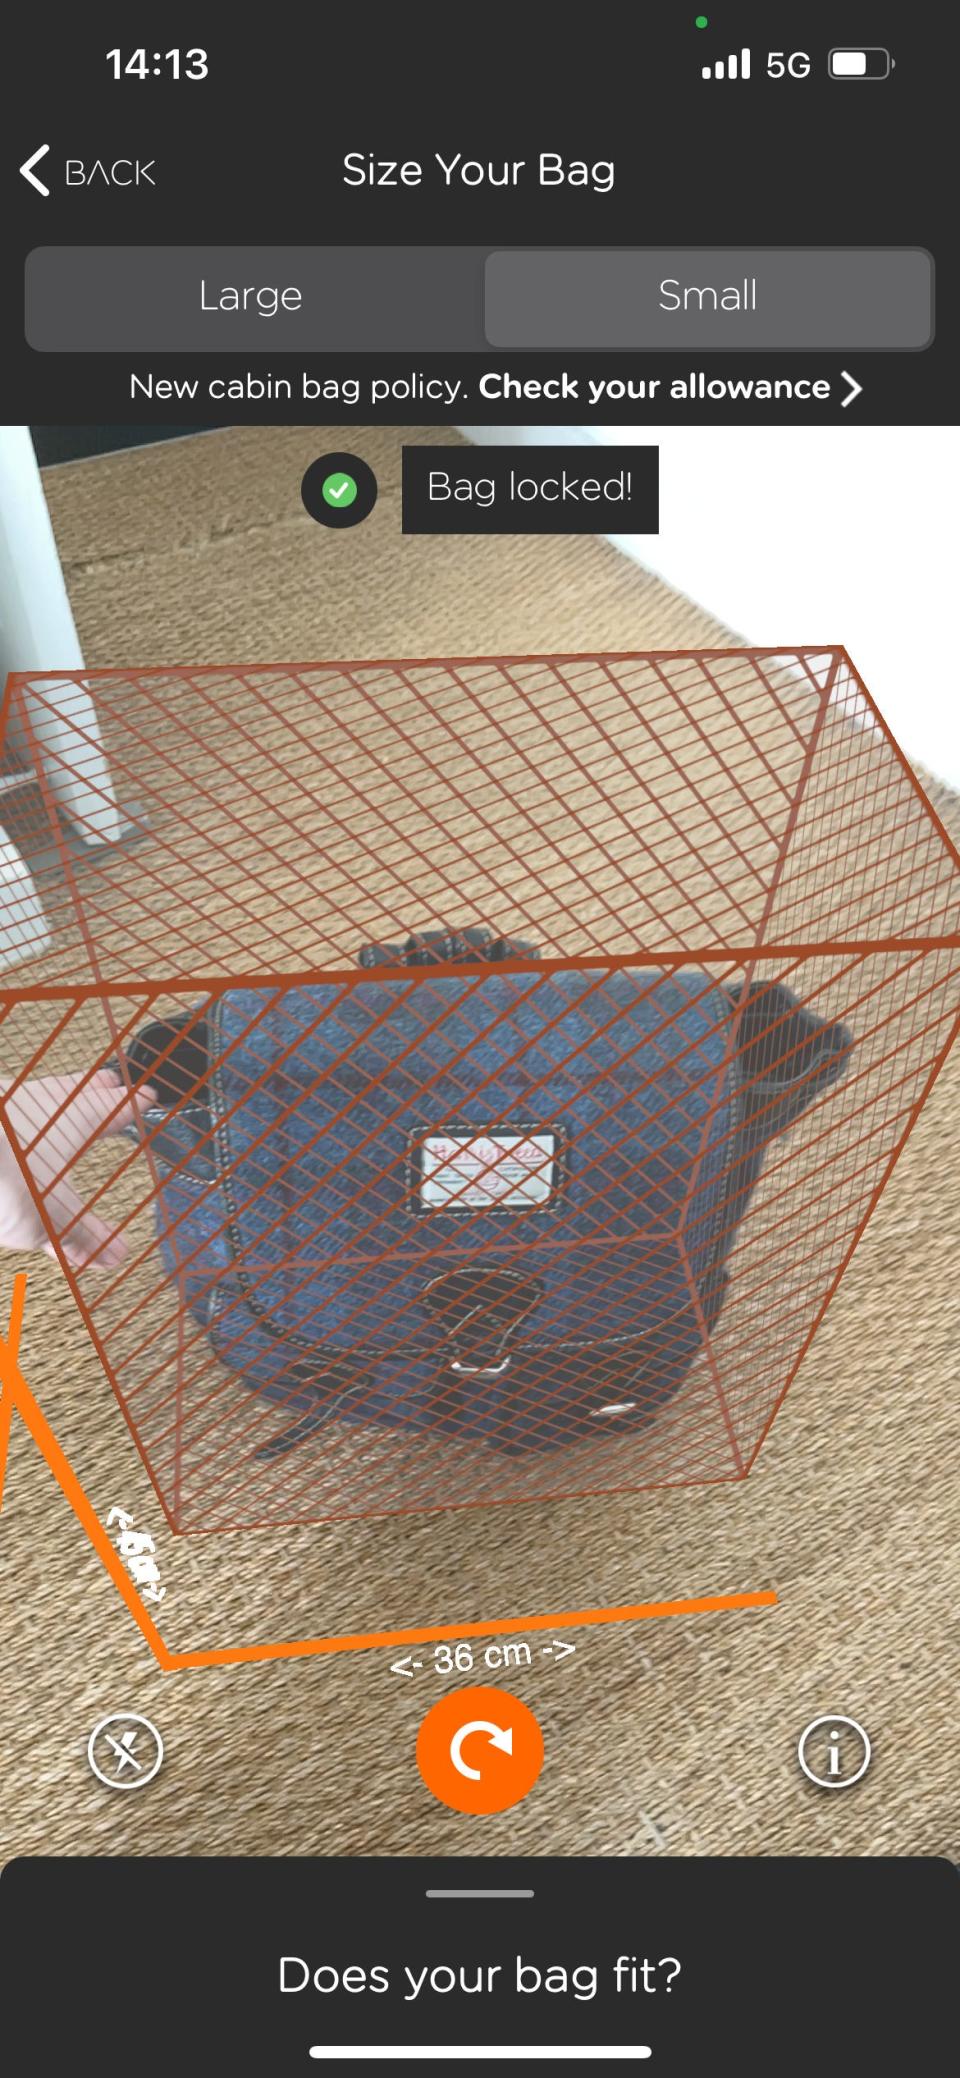 A screenshot from the easyJet app shows an augmented-reality box measuring the limits of a bag